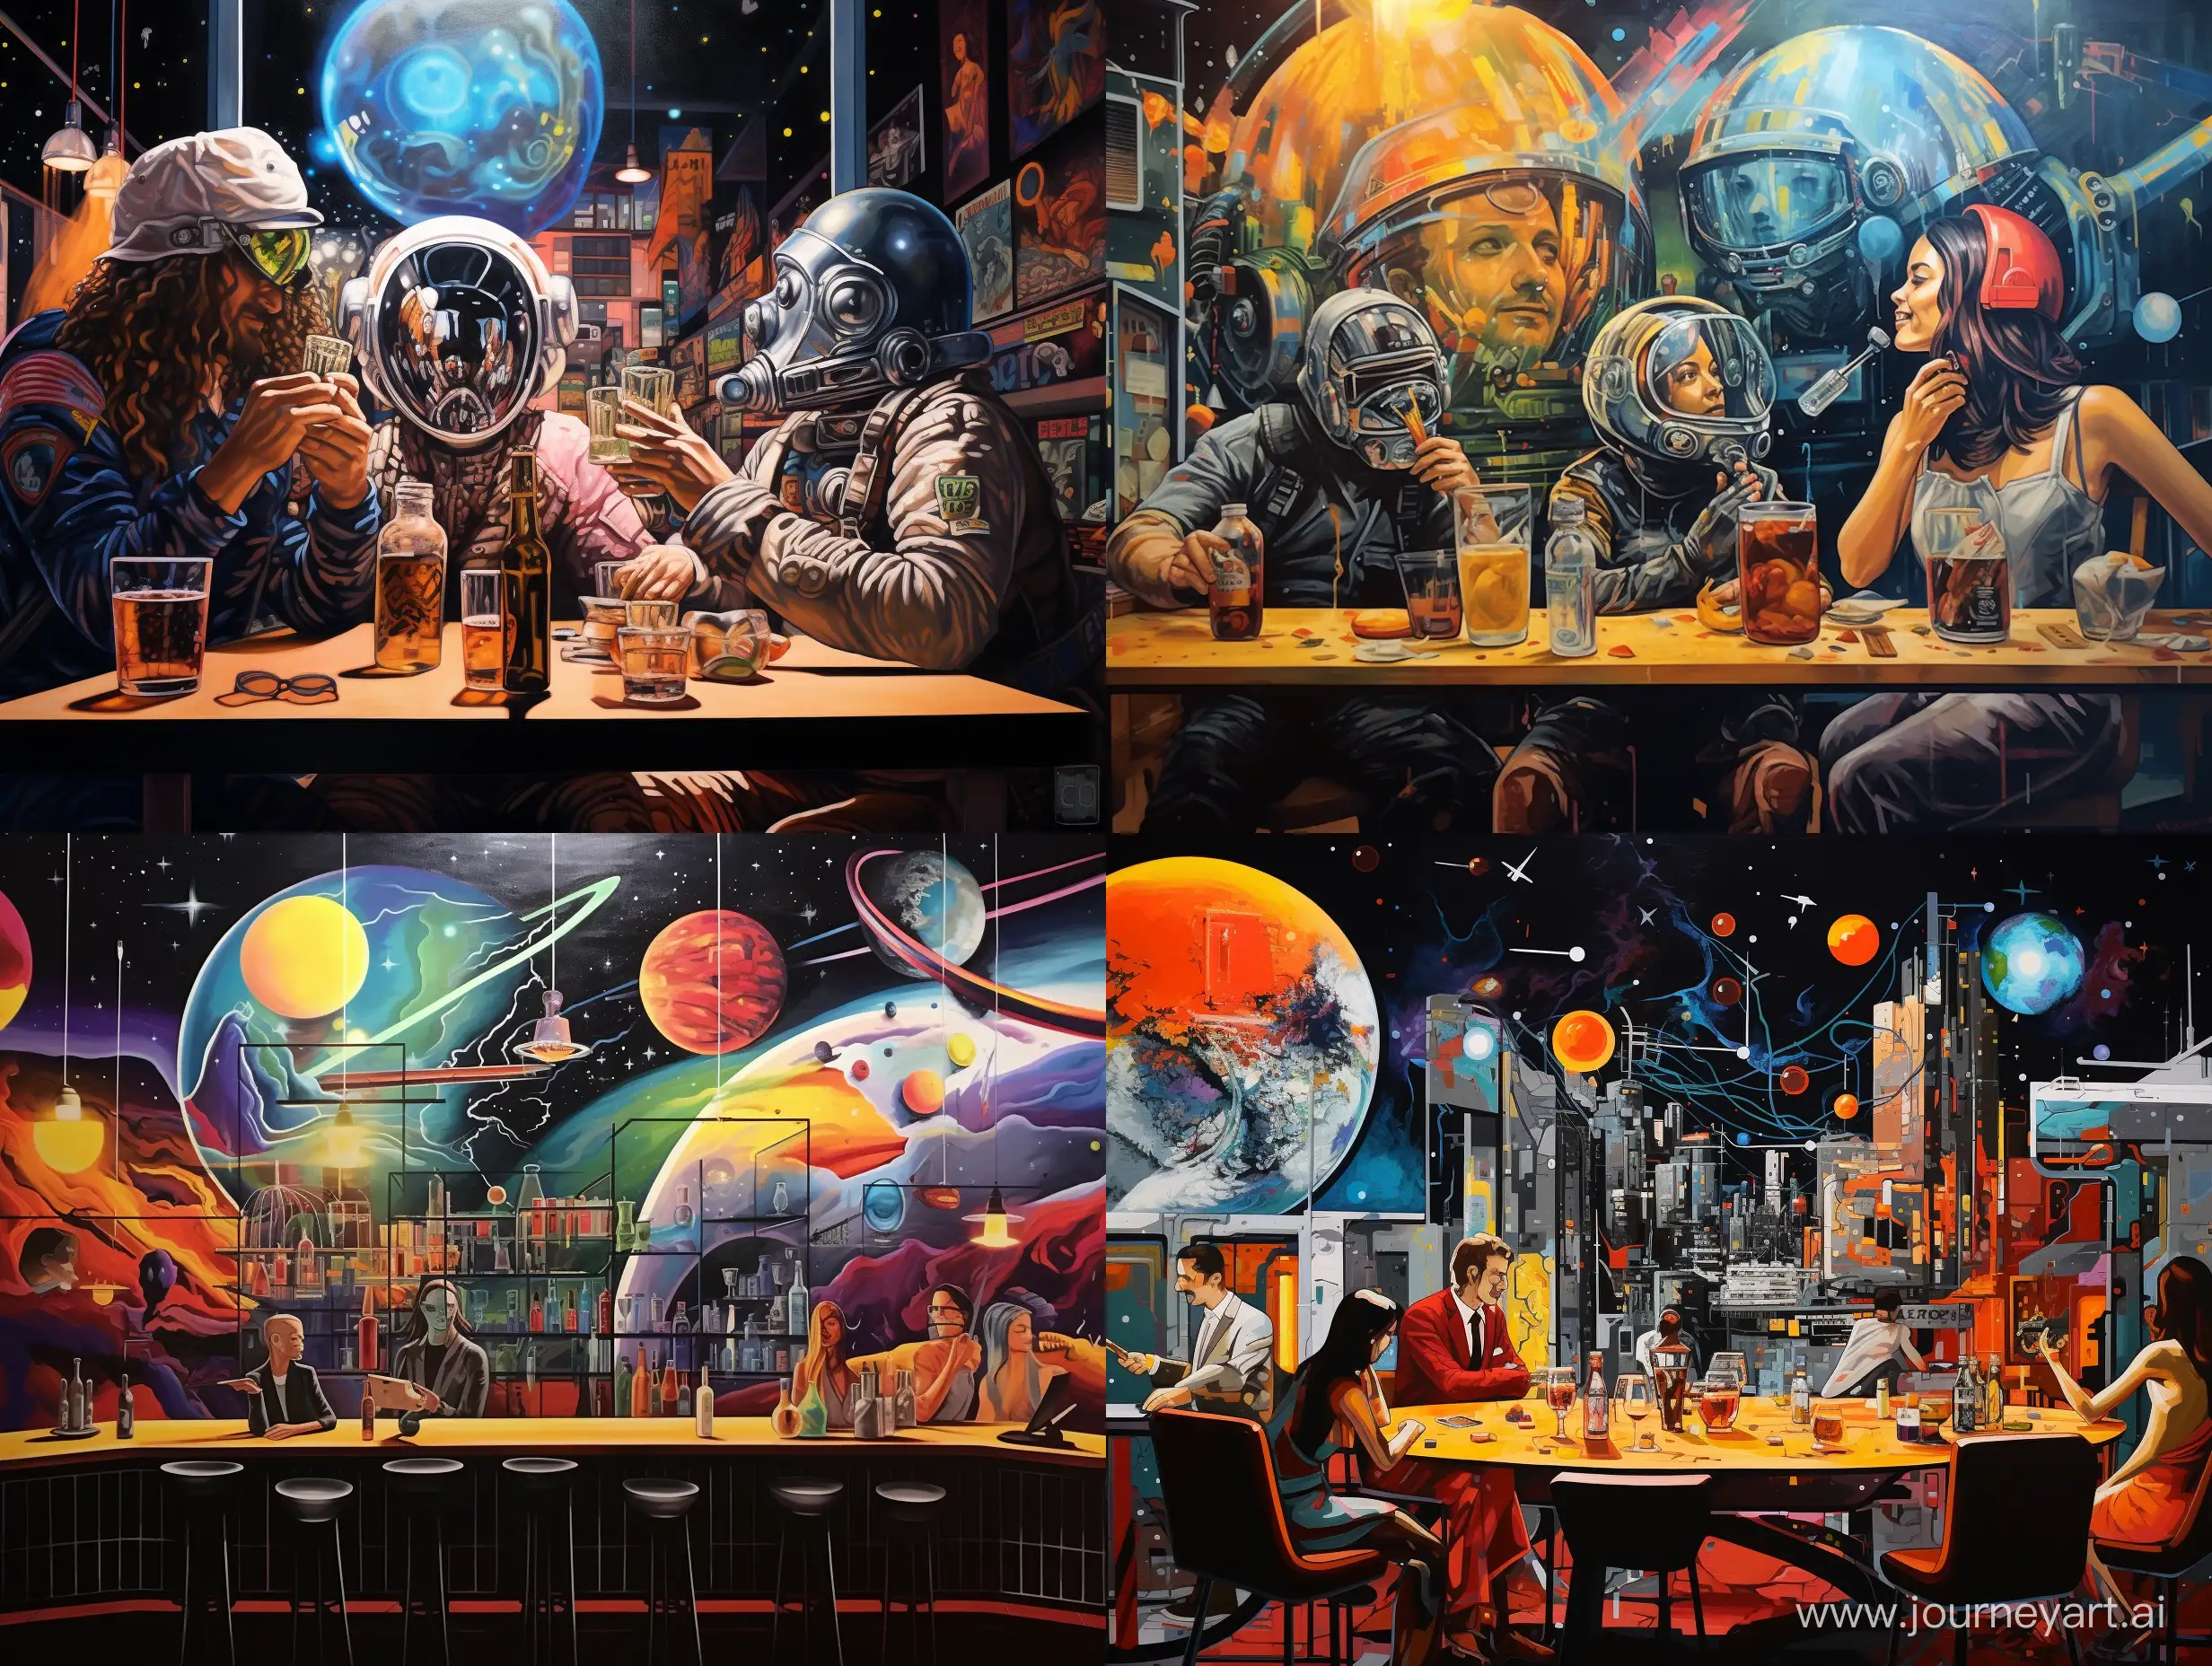 Futuristic-Graffiti-Bar-with-Men-and-Women-Enjoying-Beer-in-Space